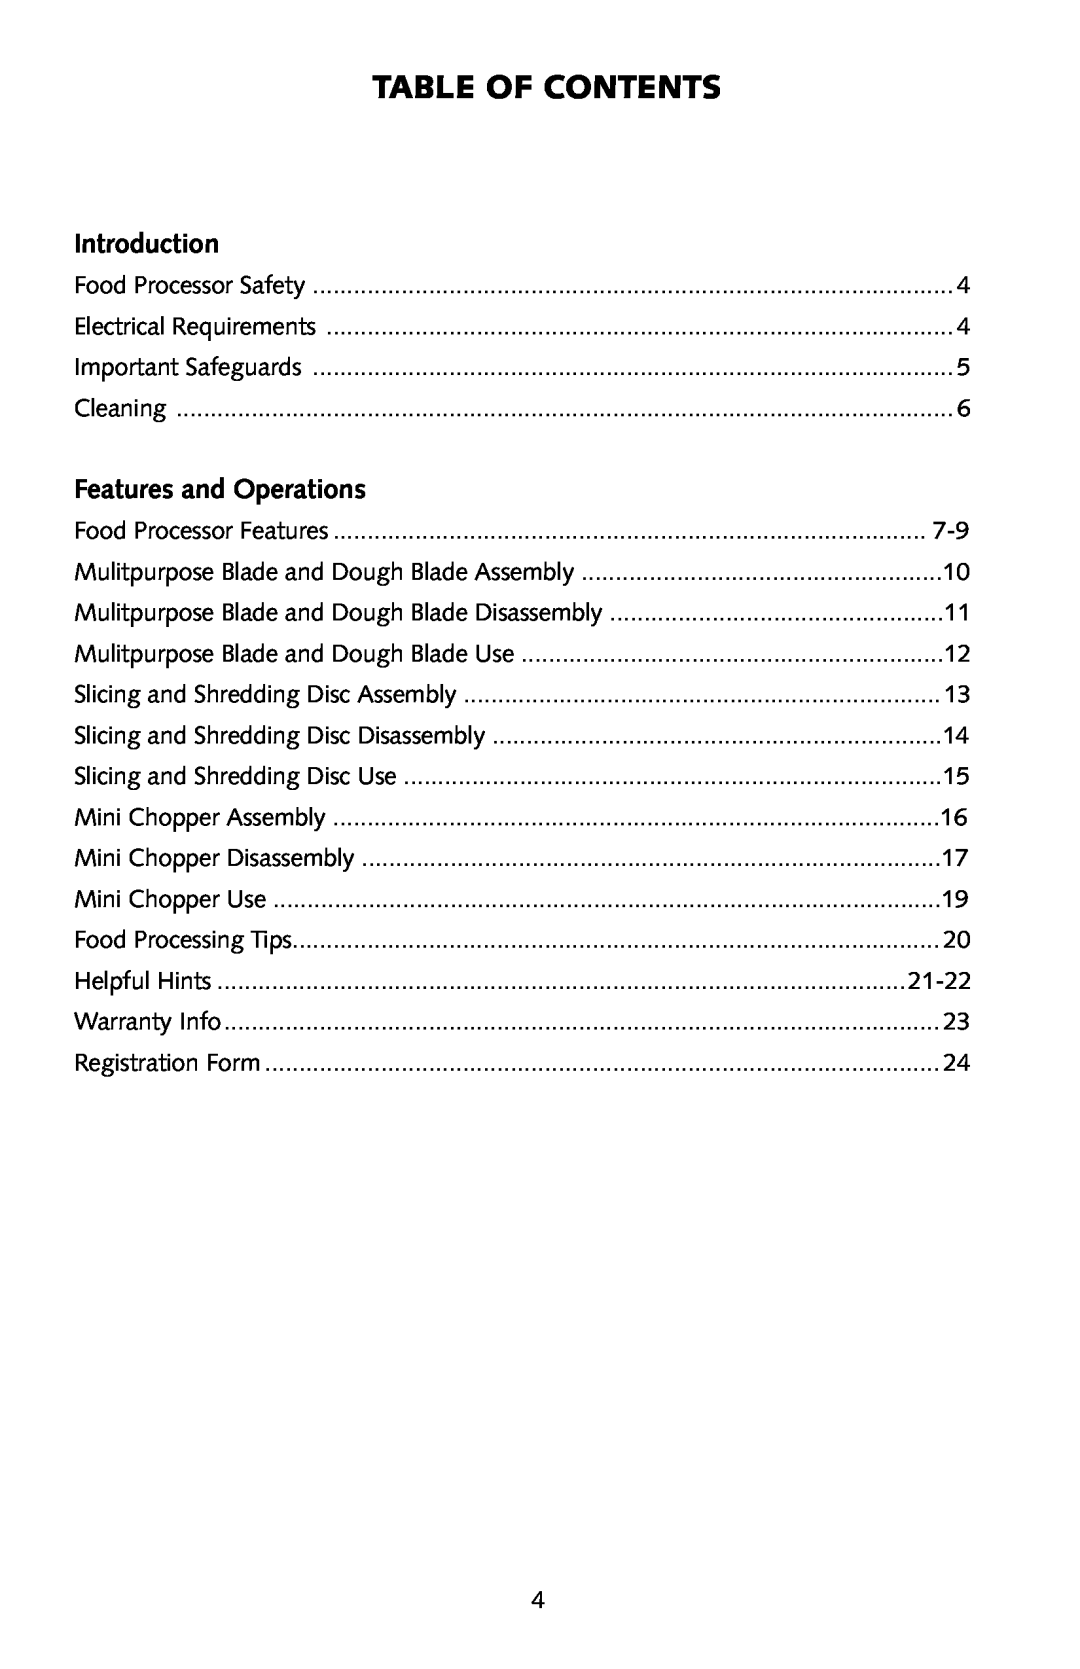 Omega FoodPro instruction manual Table Of Contents, Introduction, Features and Operations 